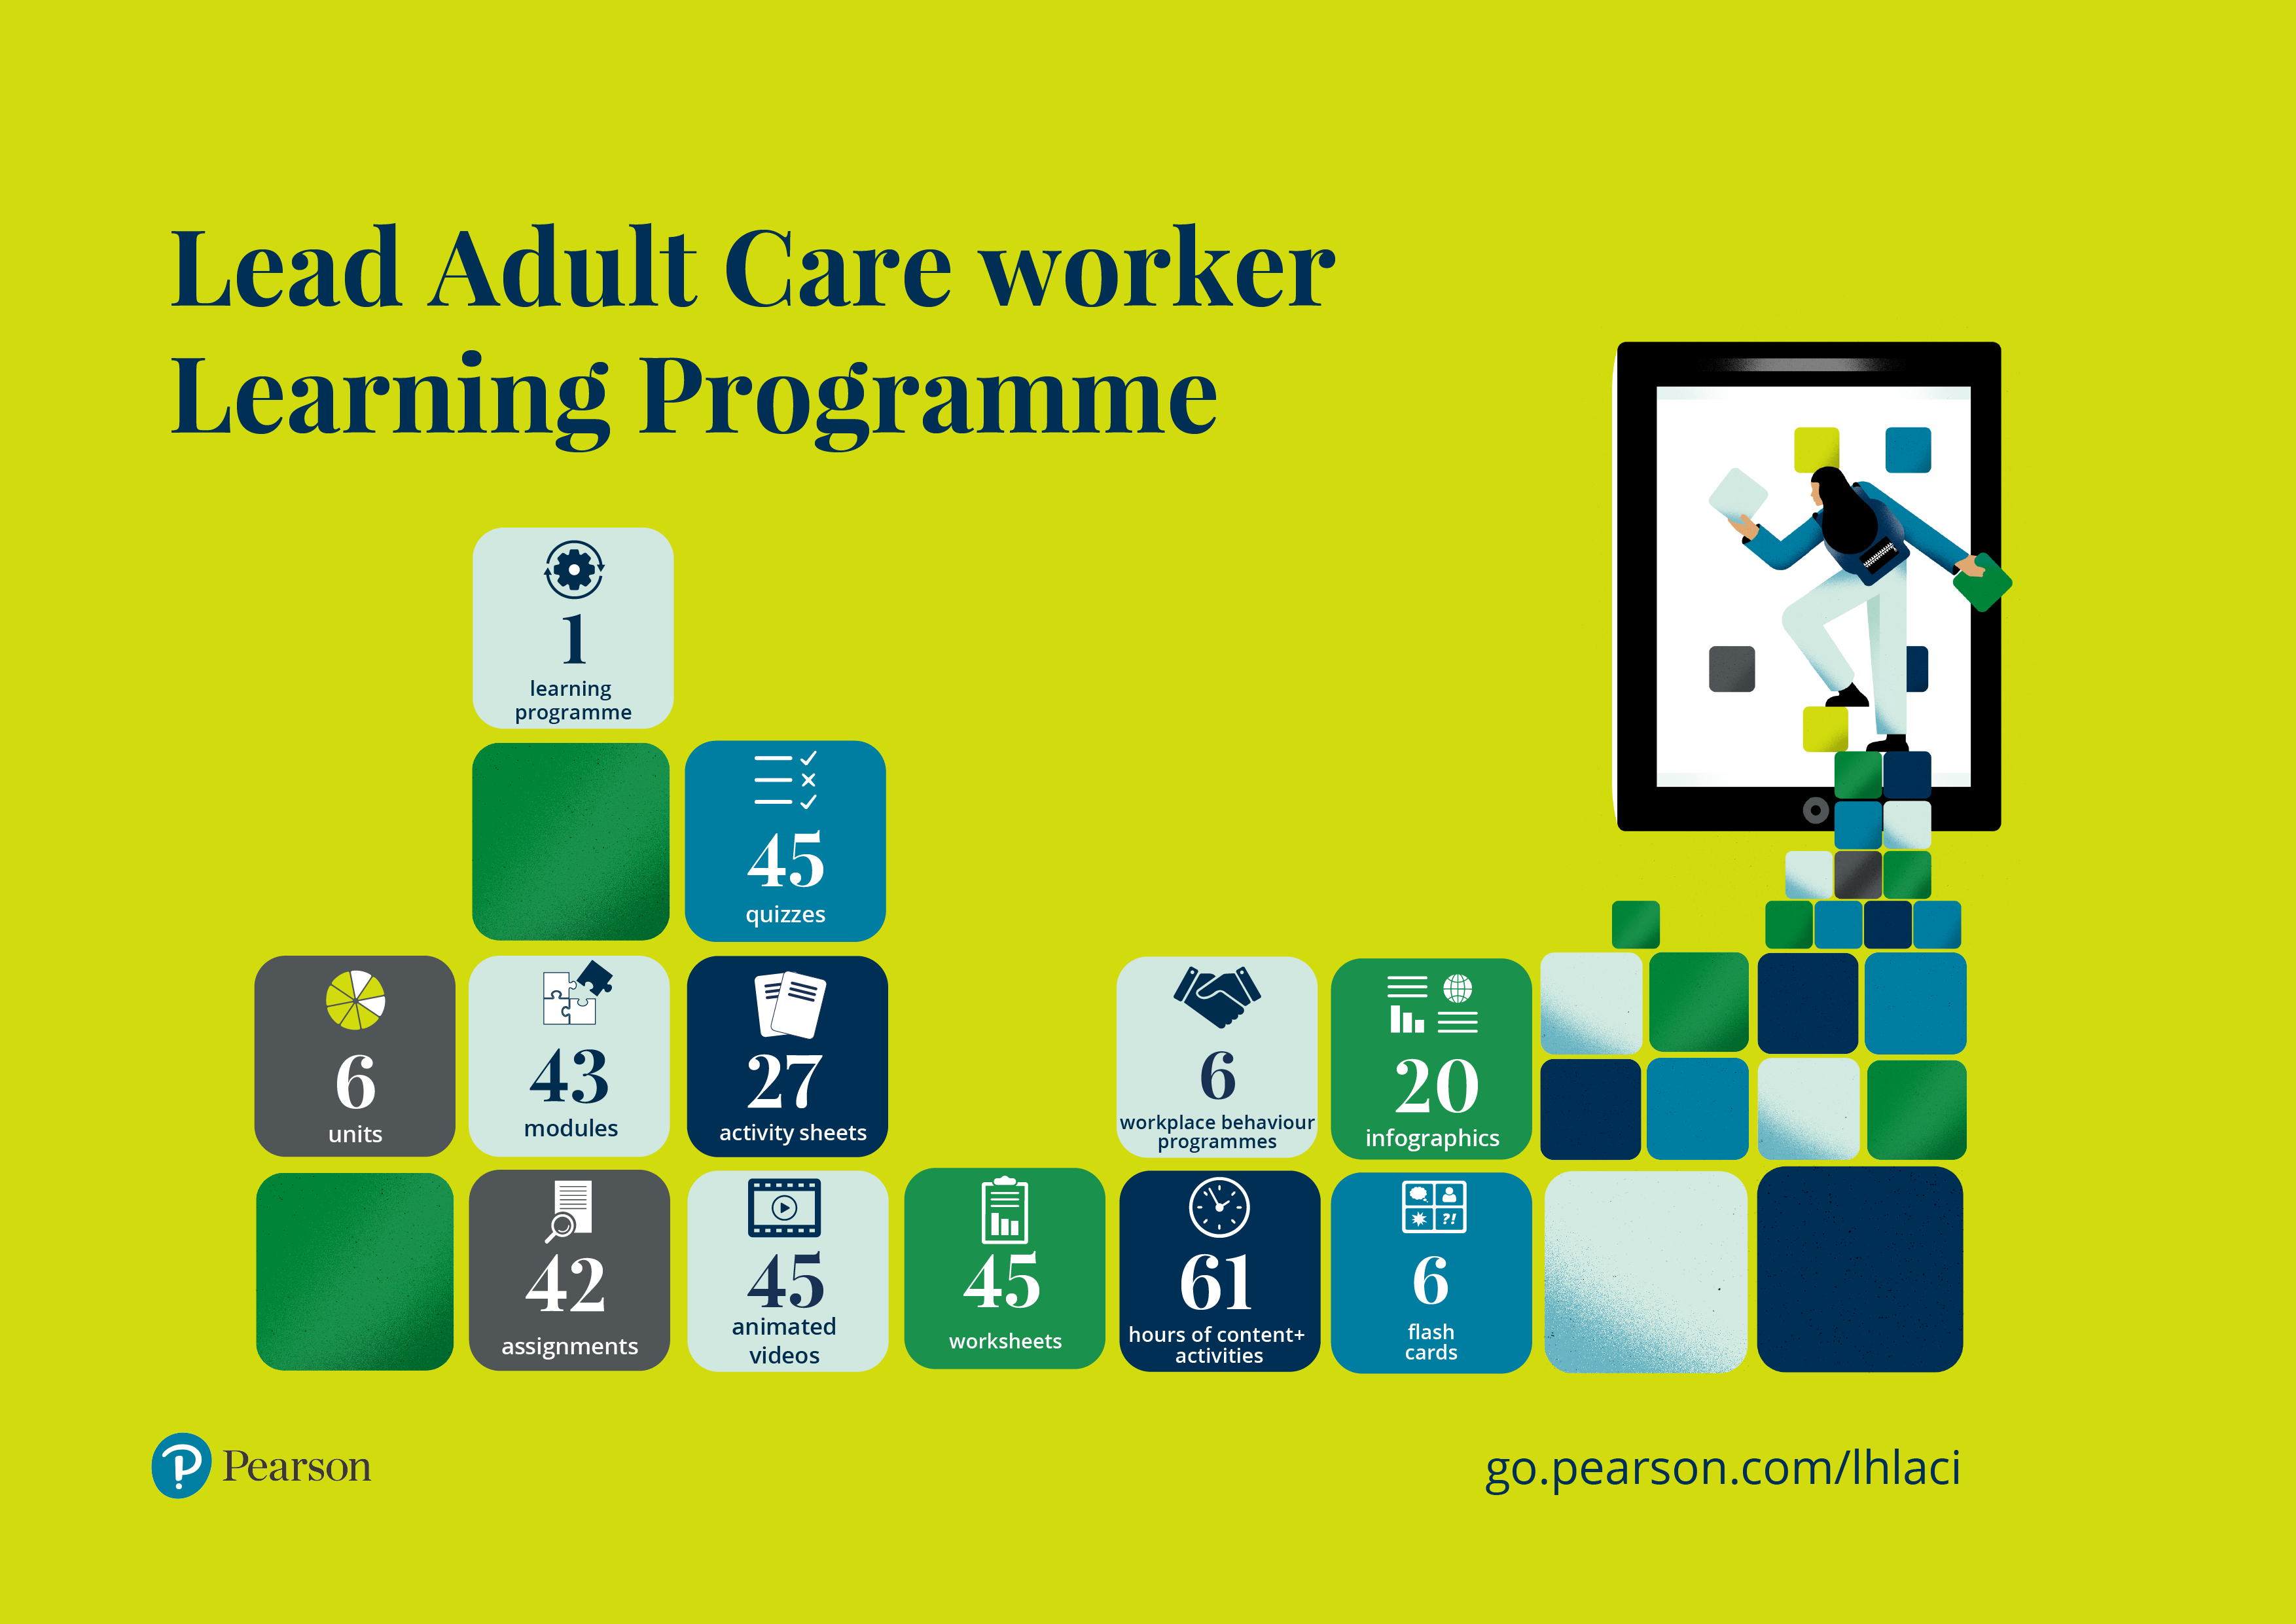 Lead Adult Care Worker infographic